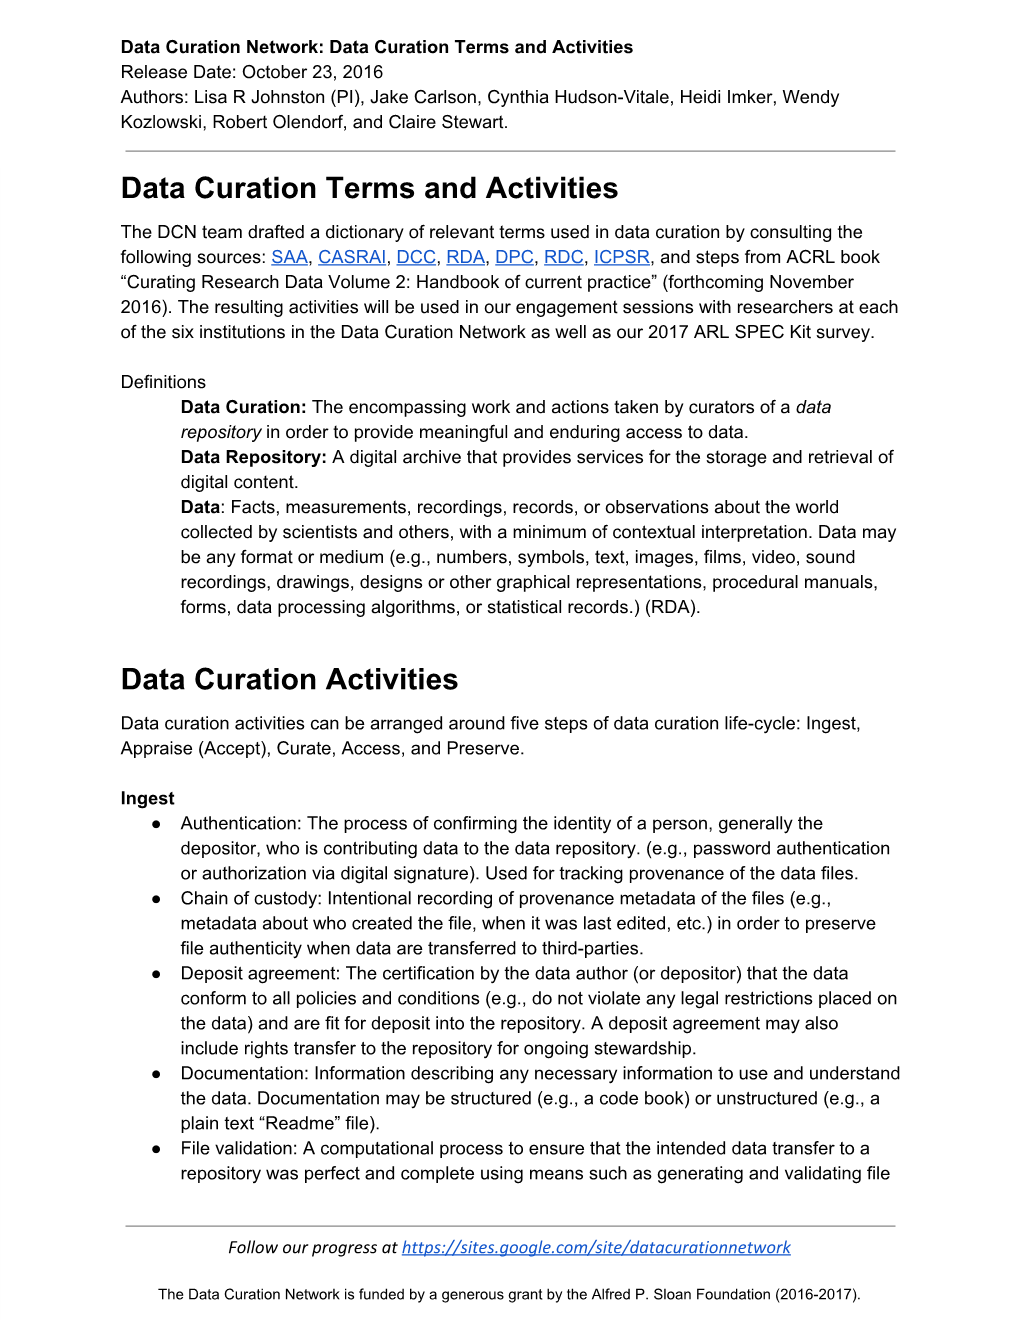 Data Curation Network